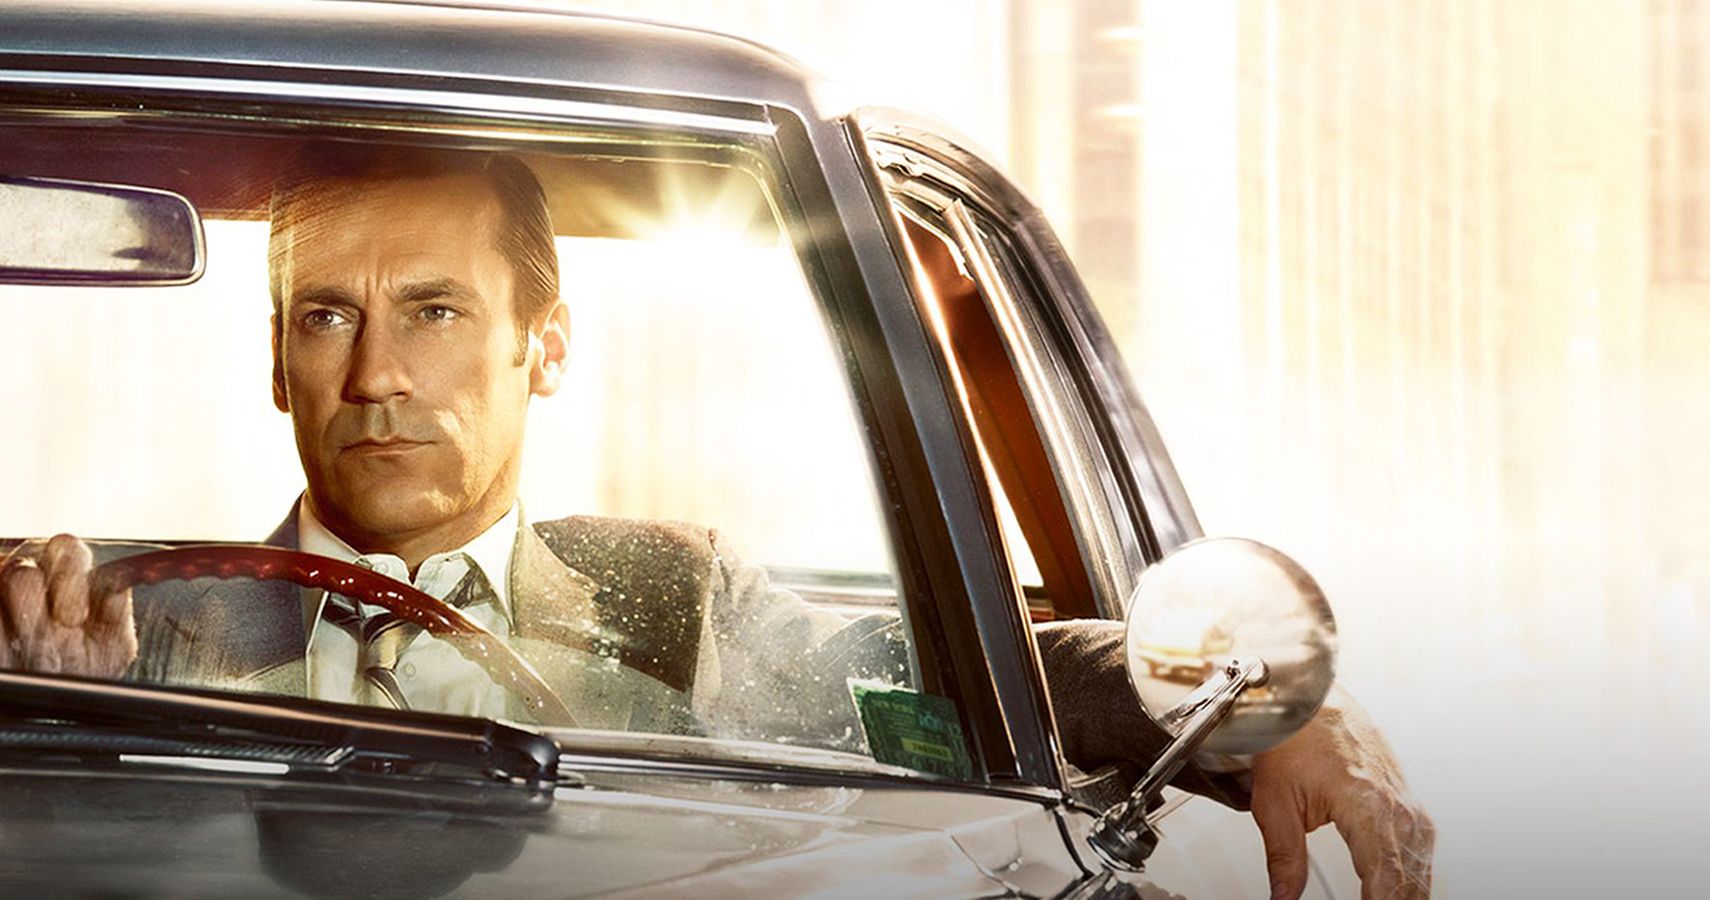 A Detailed Look At Don Draper's Cadillac Coupe DeVille From Mad Men